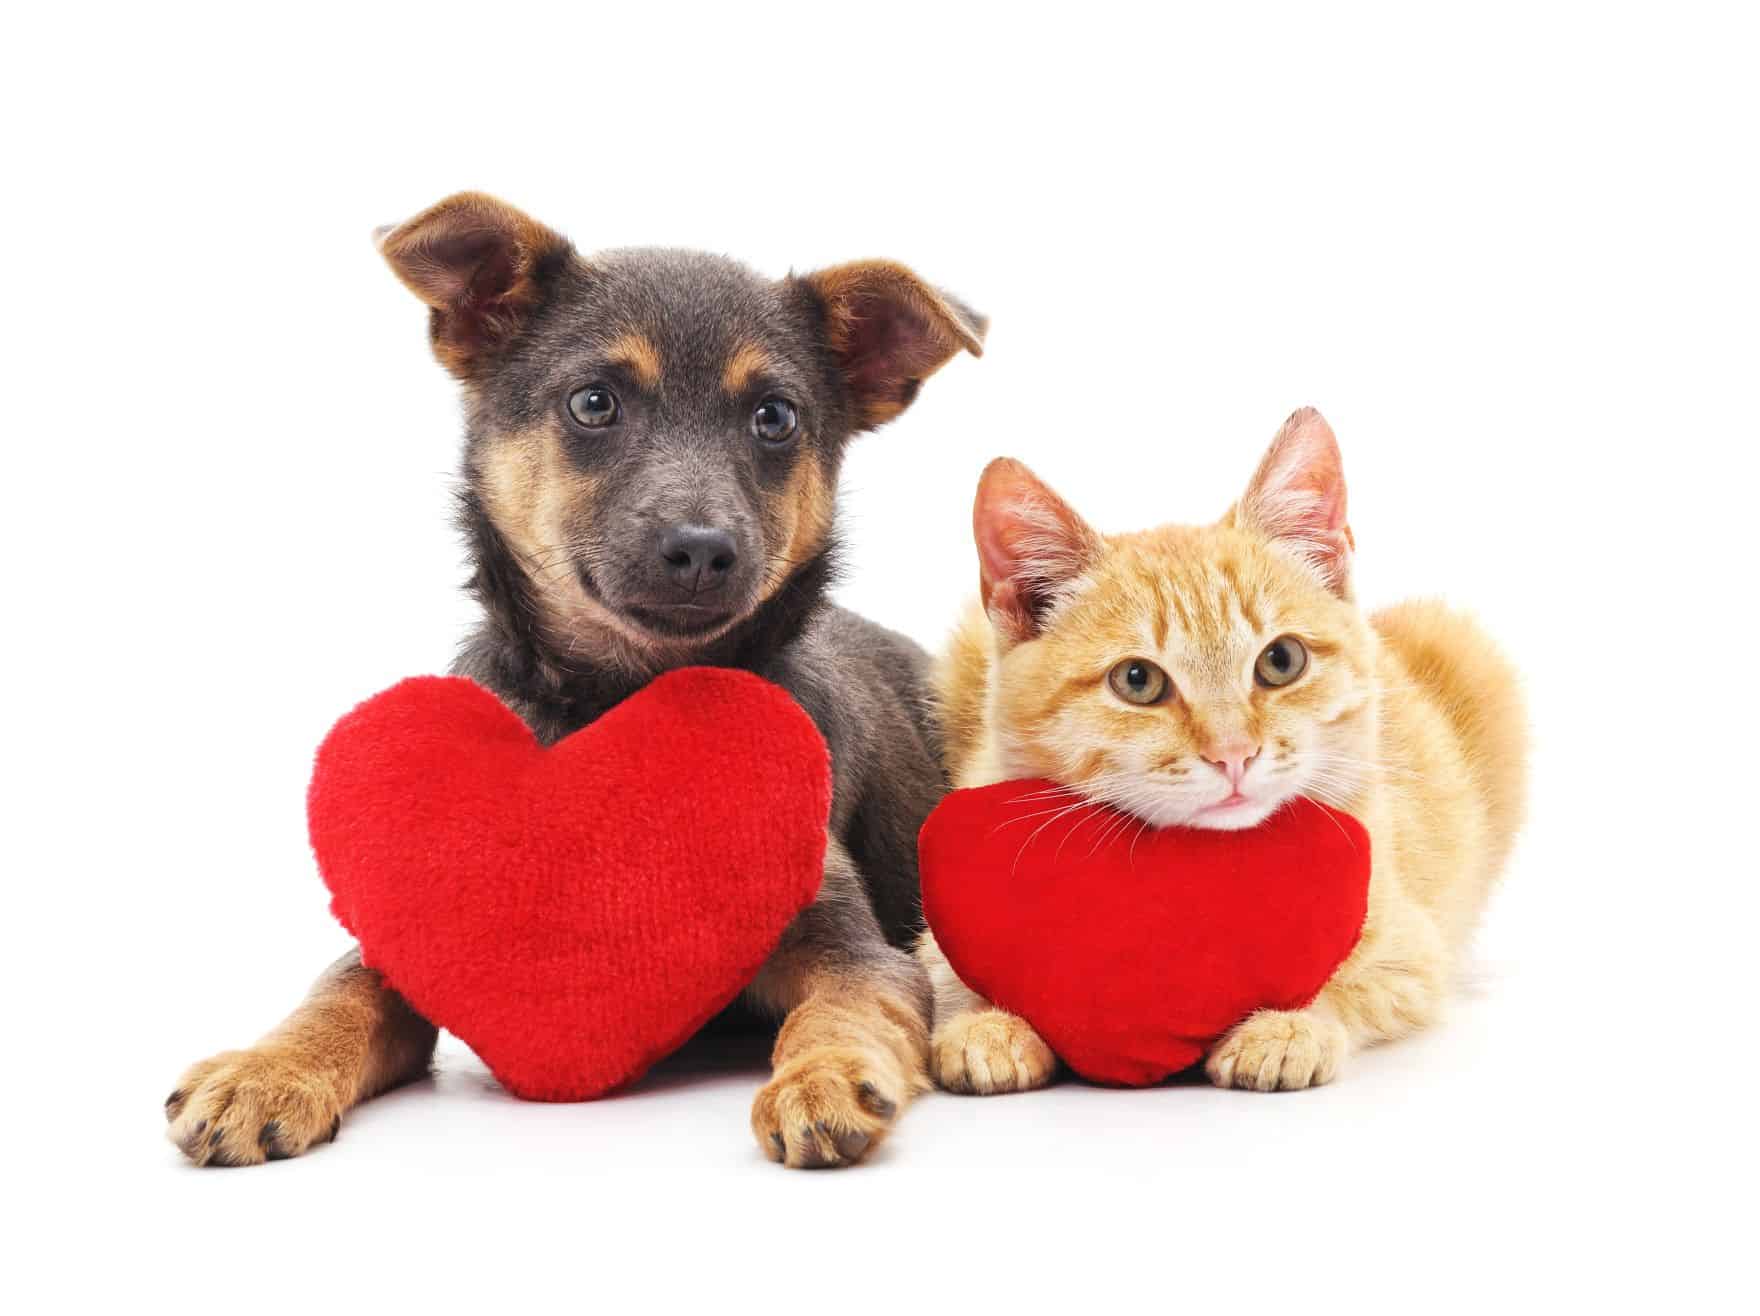 Dog and cat with heart pillows.